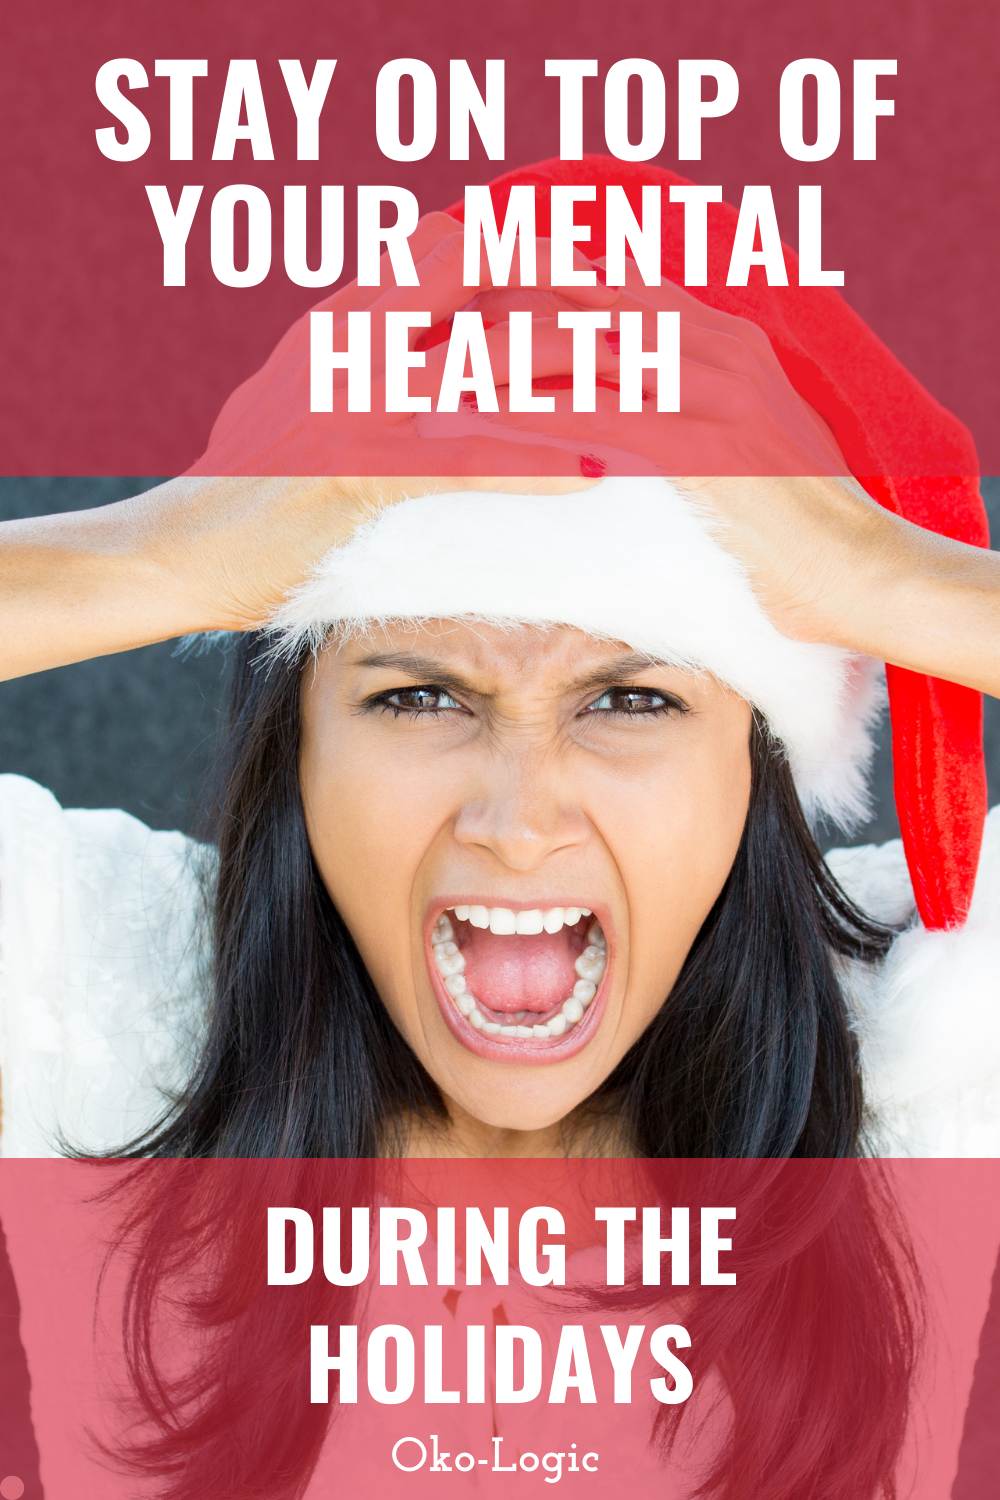 7 Tips to Stay on Top of Your Mental Health During the Holidays